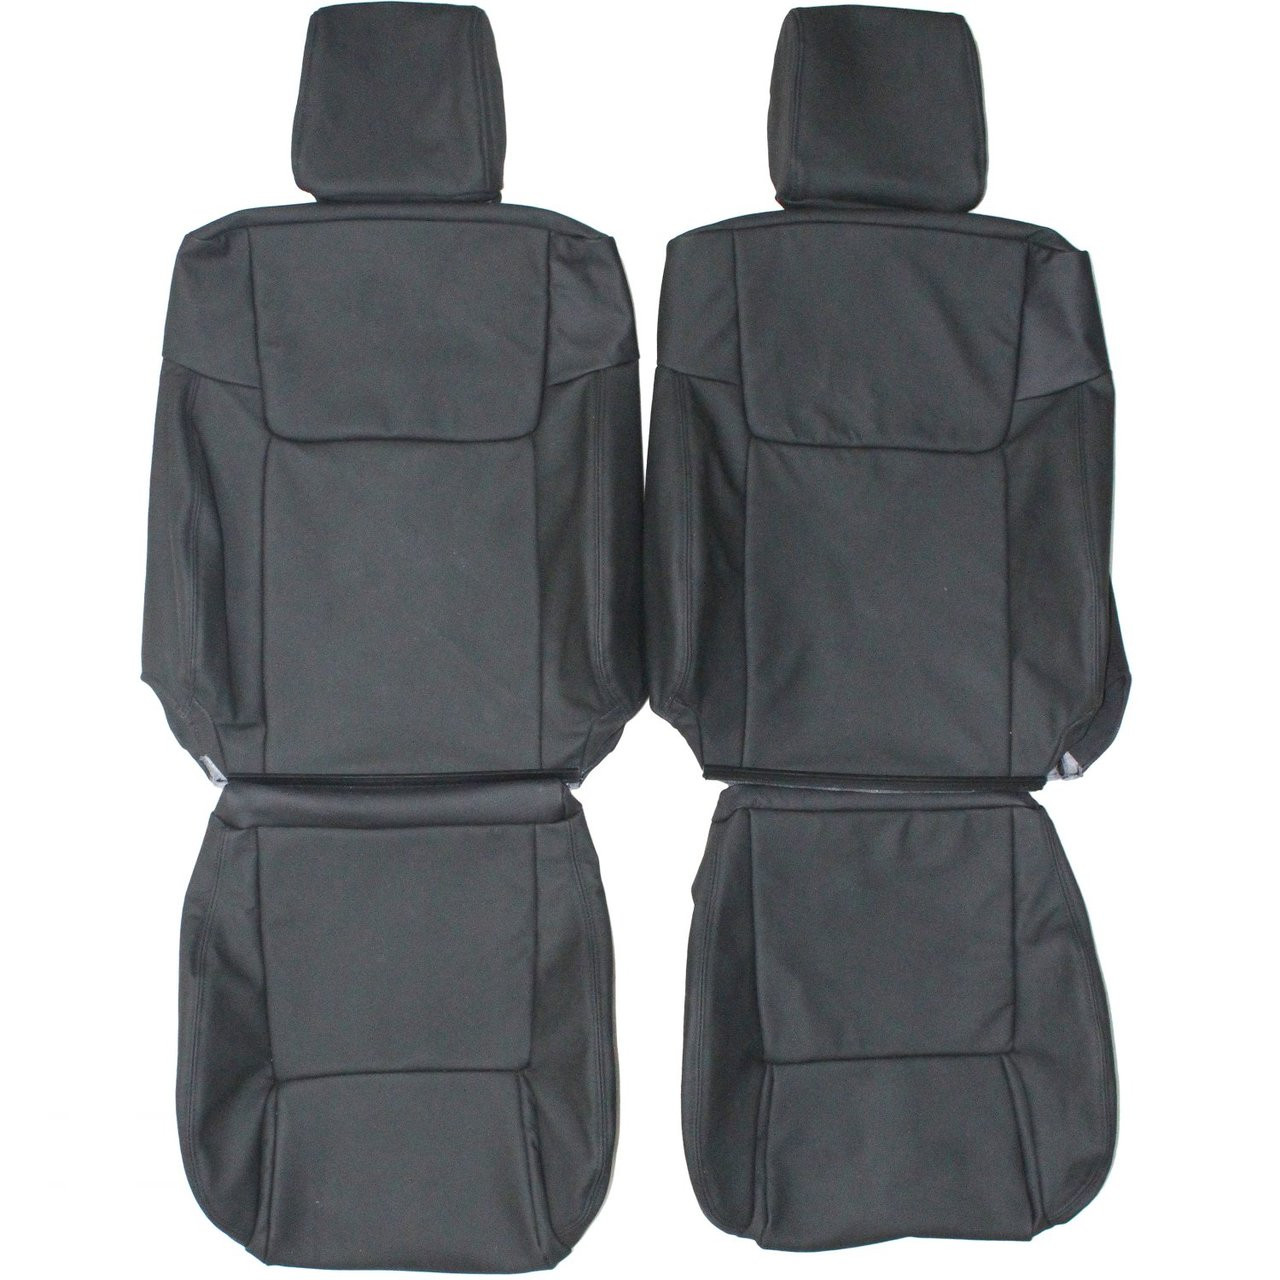 2006-2010 Jeep Commander Custom Real Leather Seat Covers (Front) - Lseat.com